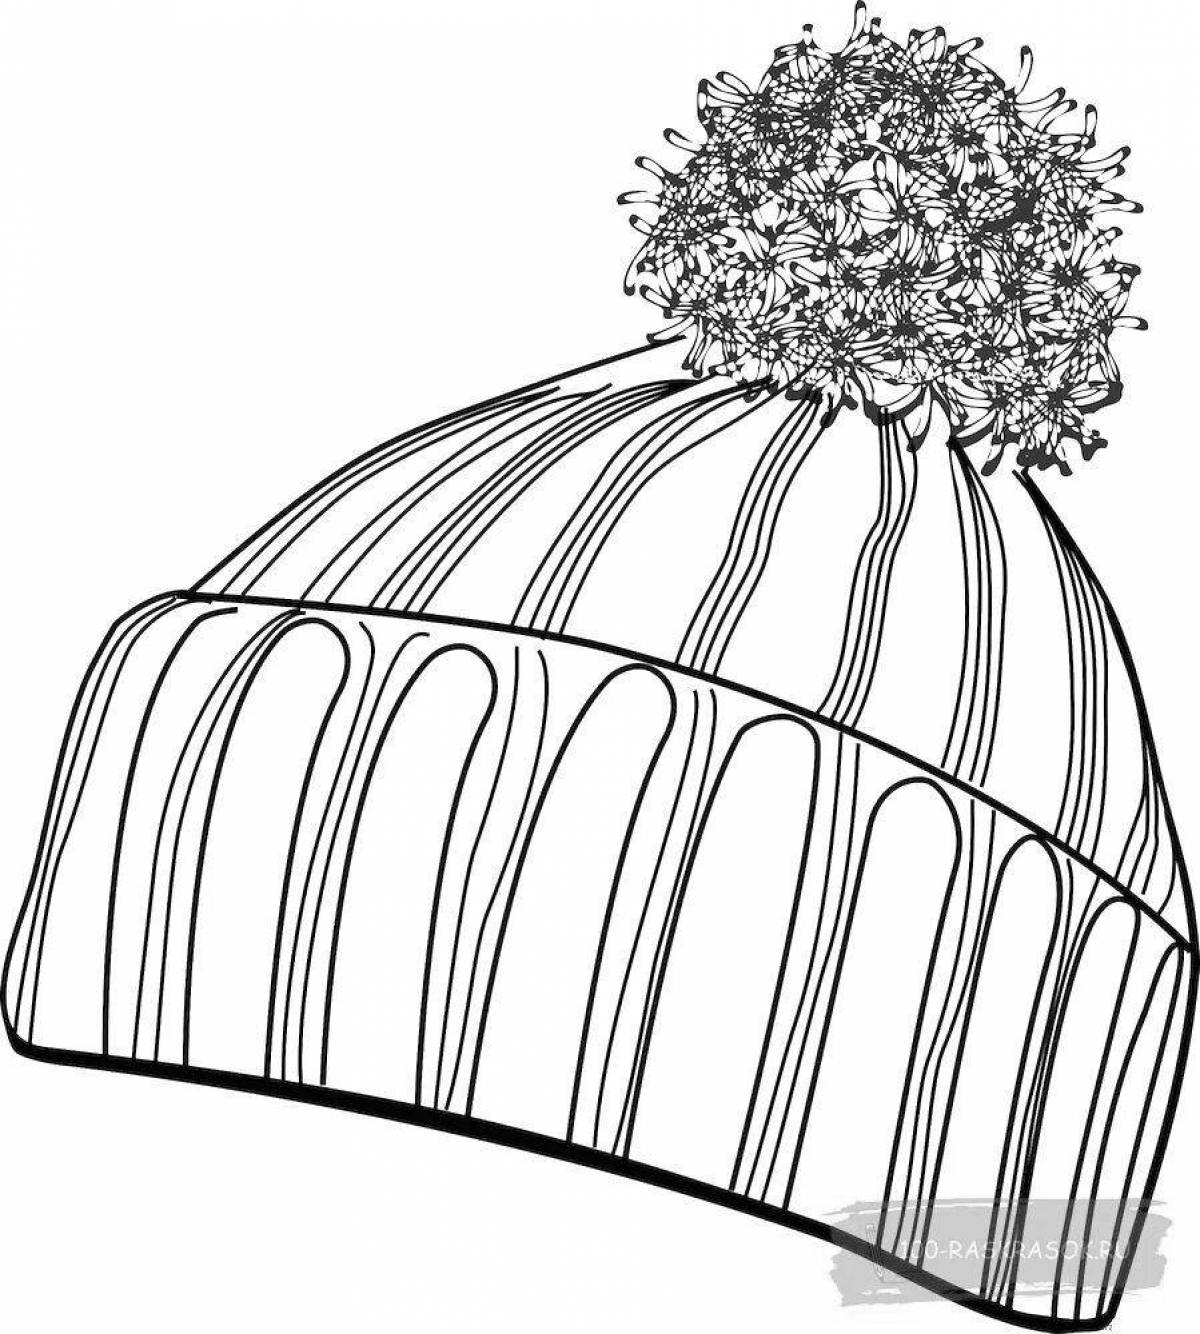 Adorable hat coloring book for kids